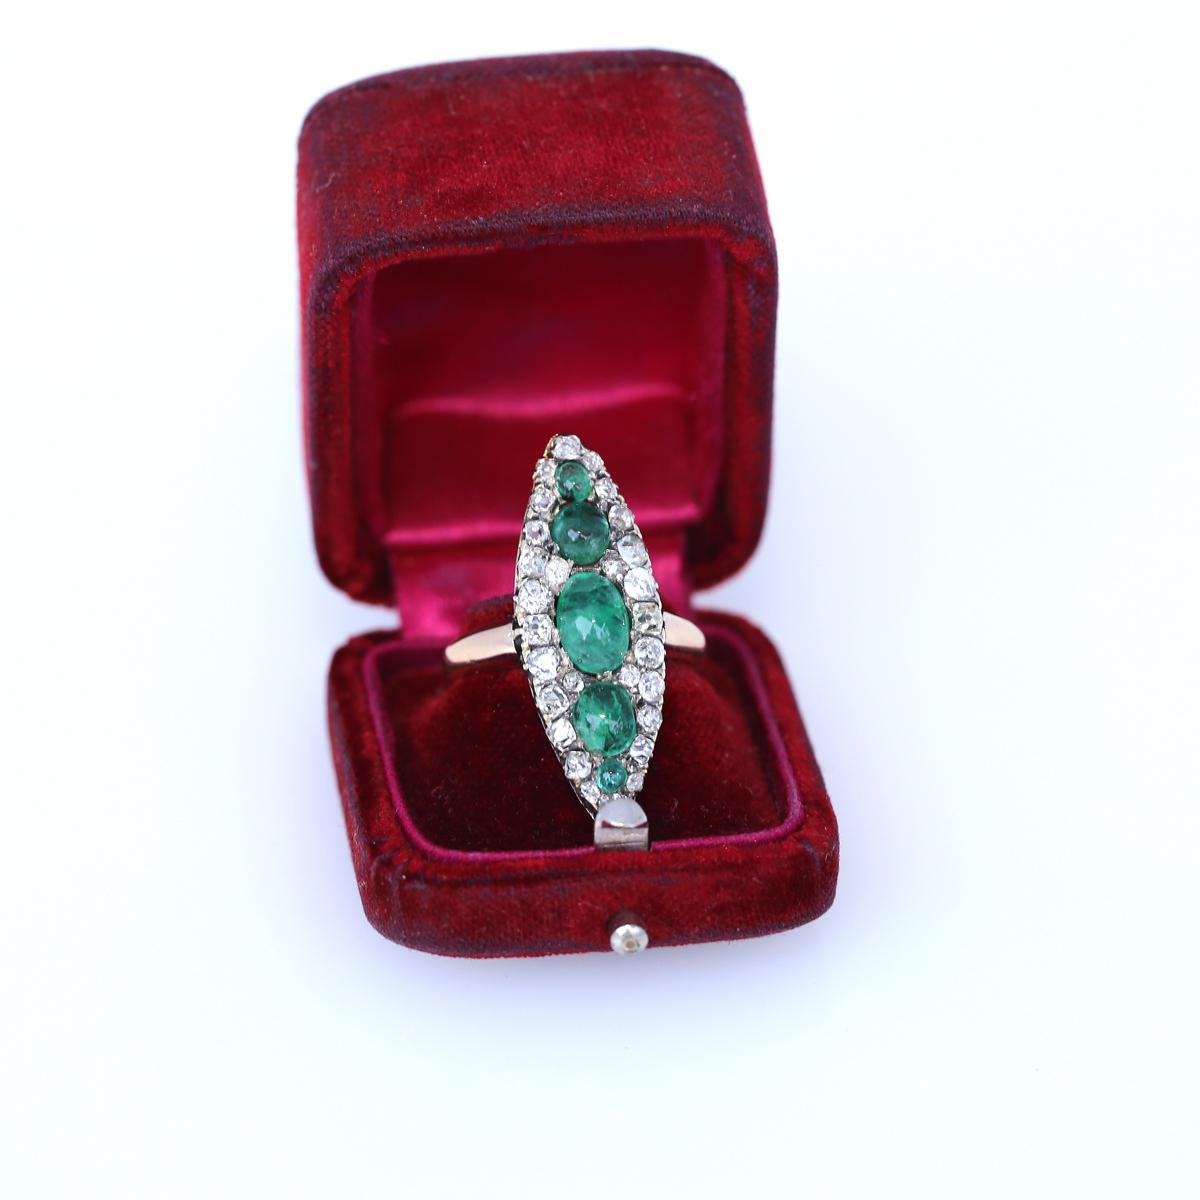 Victorian Emeralds Diamonds Navette Gold Silver, 1880.
Victorian period navette-shaped ring with Cabochon Emeralds and old-cut Diamonds. A really great example of the era. Delicate elegant and stylish. The Emeralds are of lovely green shade and fine